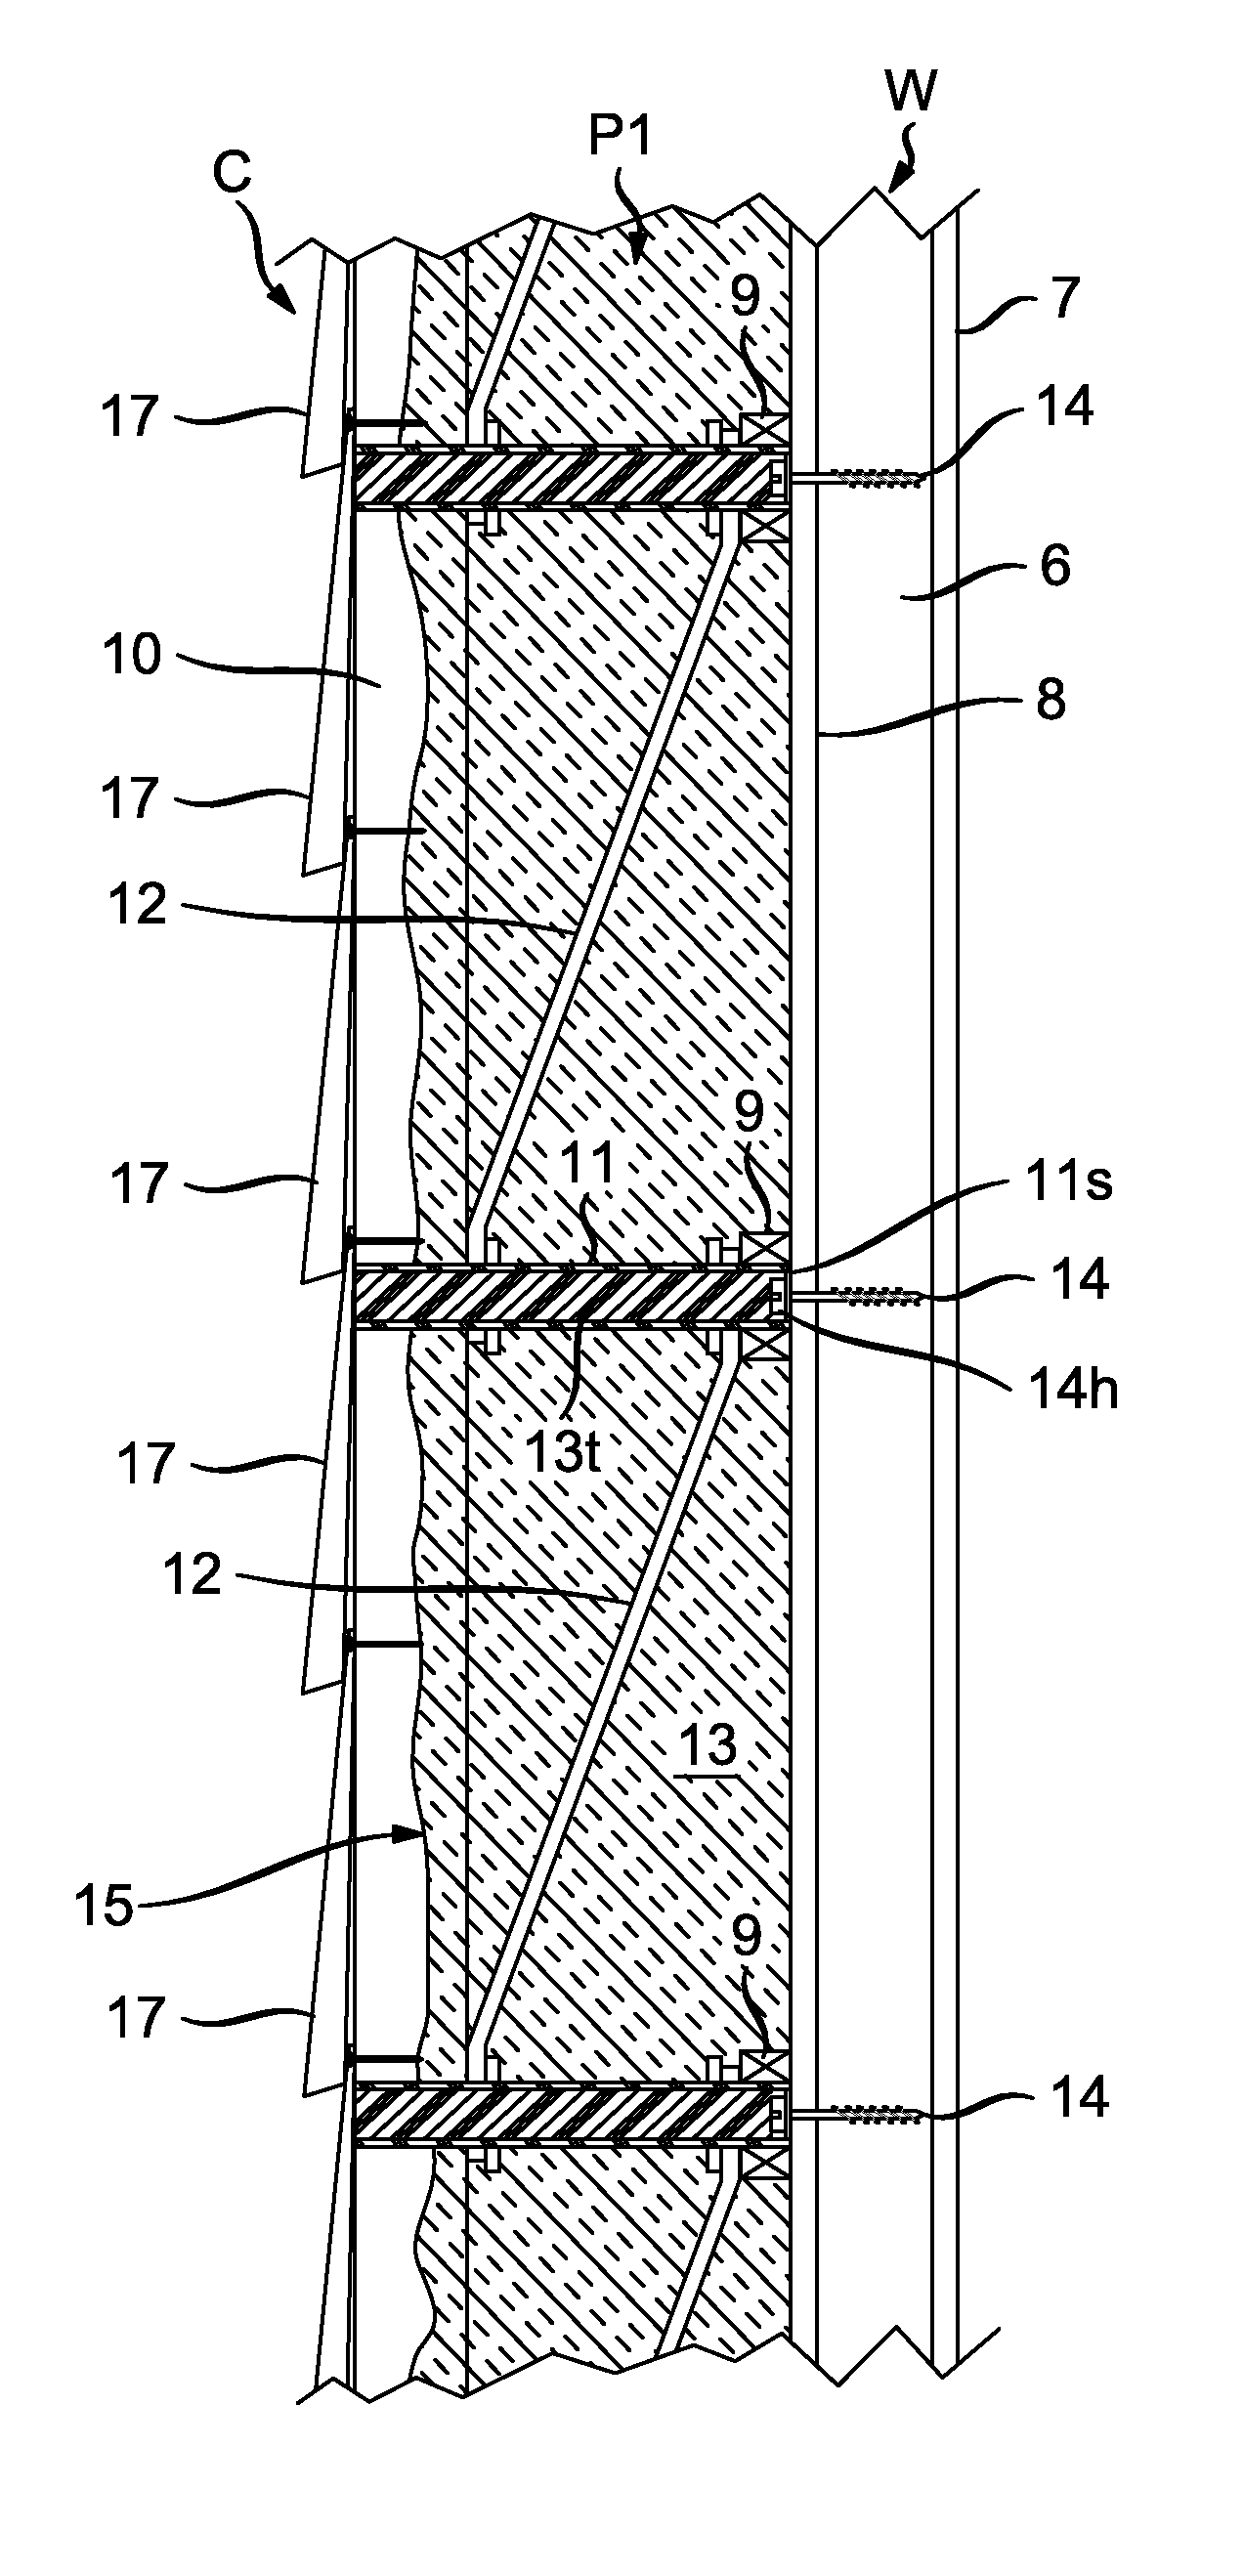 Non-Structural Insulating Panel System